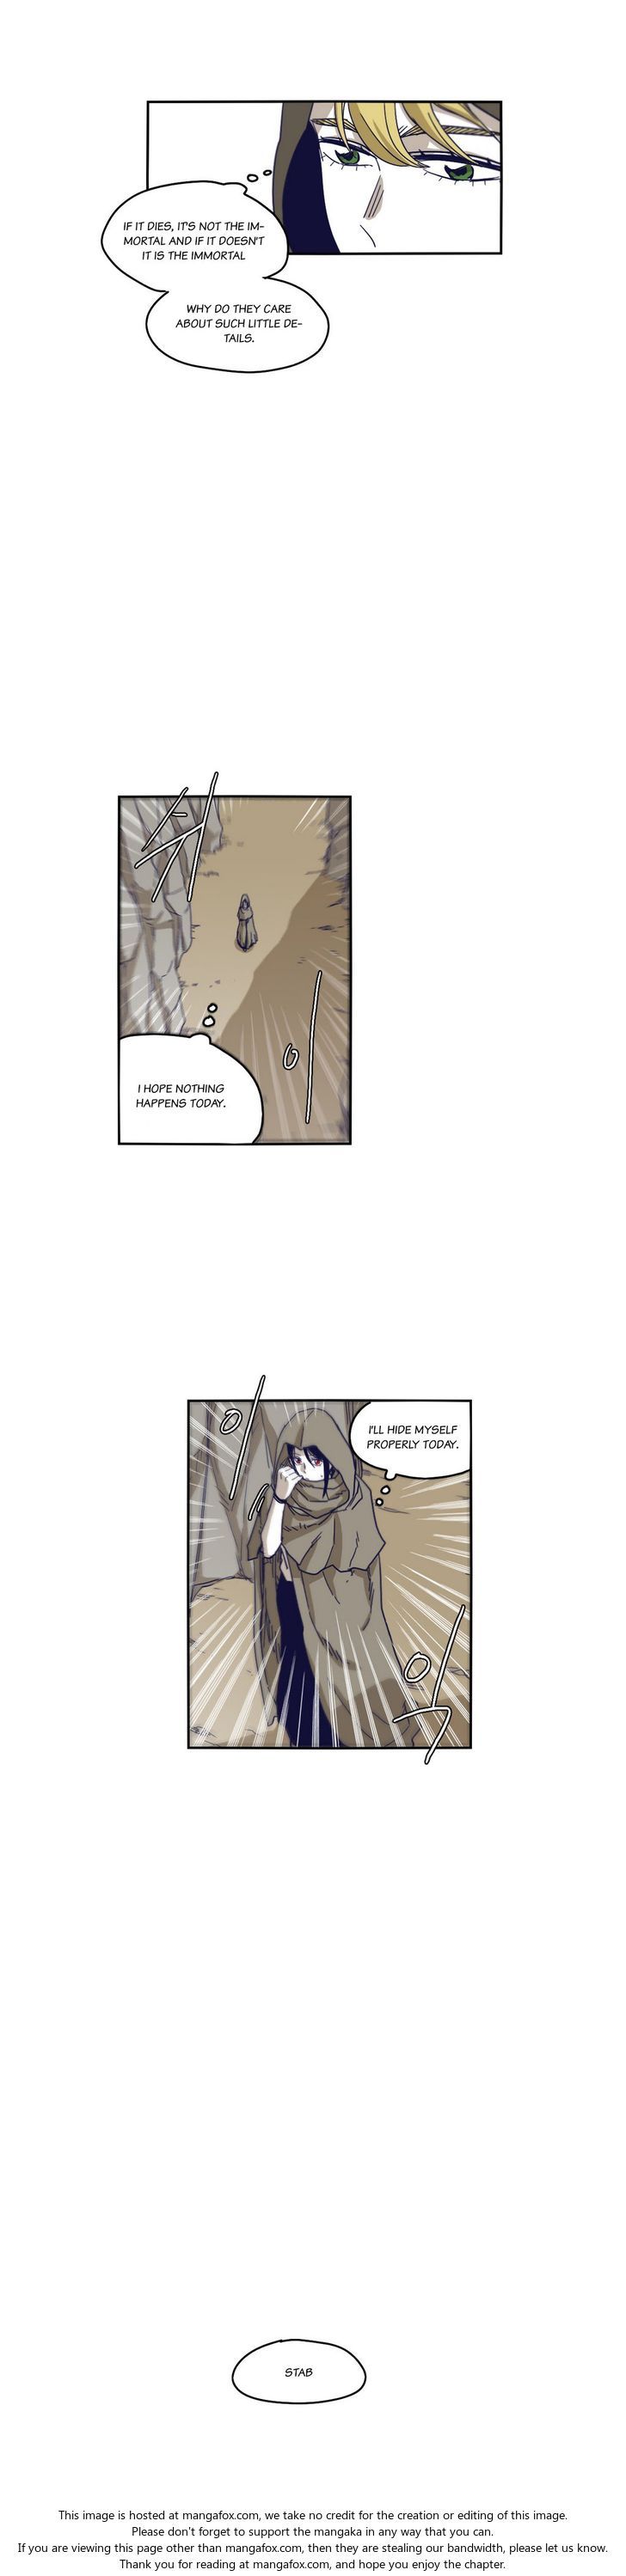 Epic of Gilgamesh Chapter 035 page 9